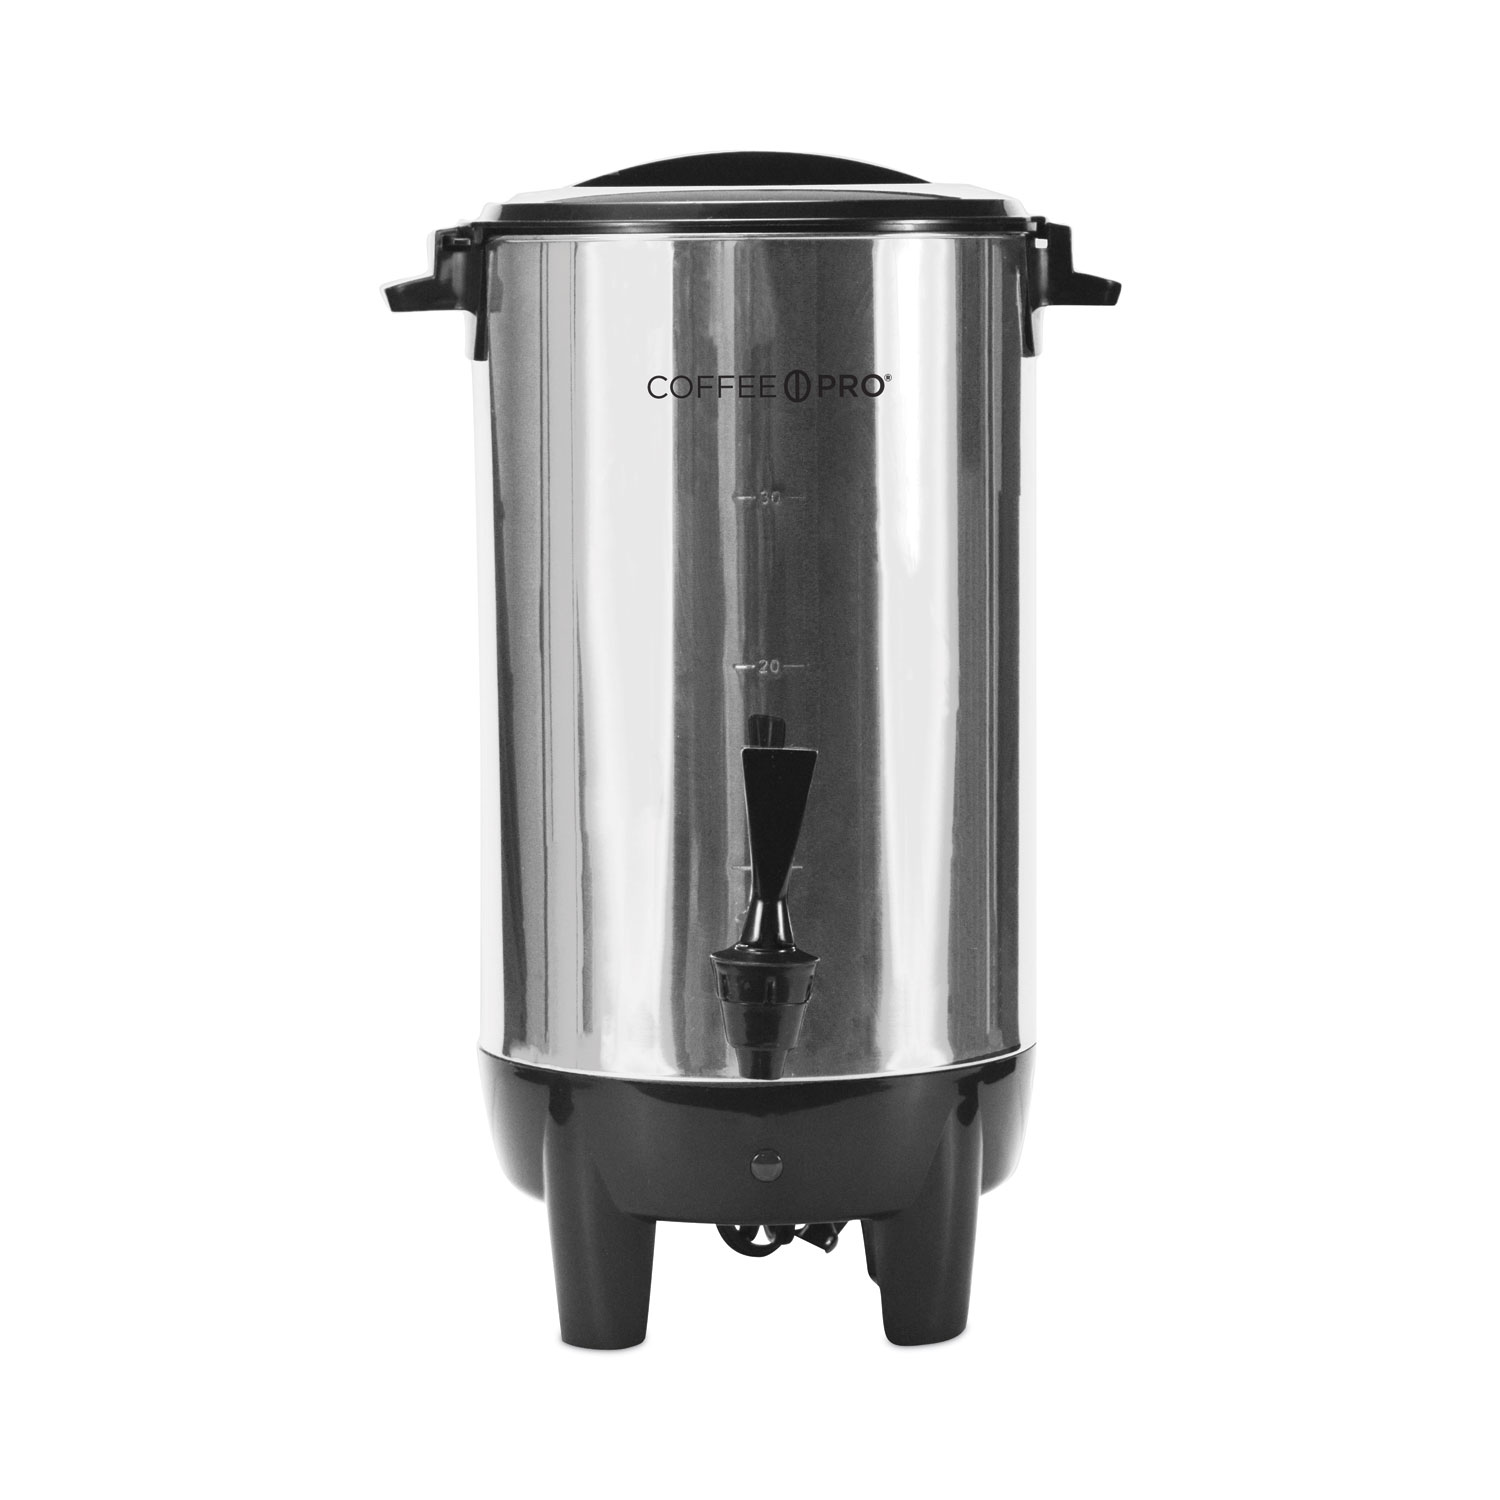 OKSLO Cp30 30-cup percolating urn stainless steel Model 6986-12883-6513-8518 